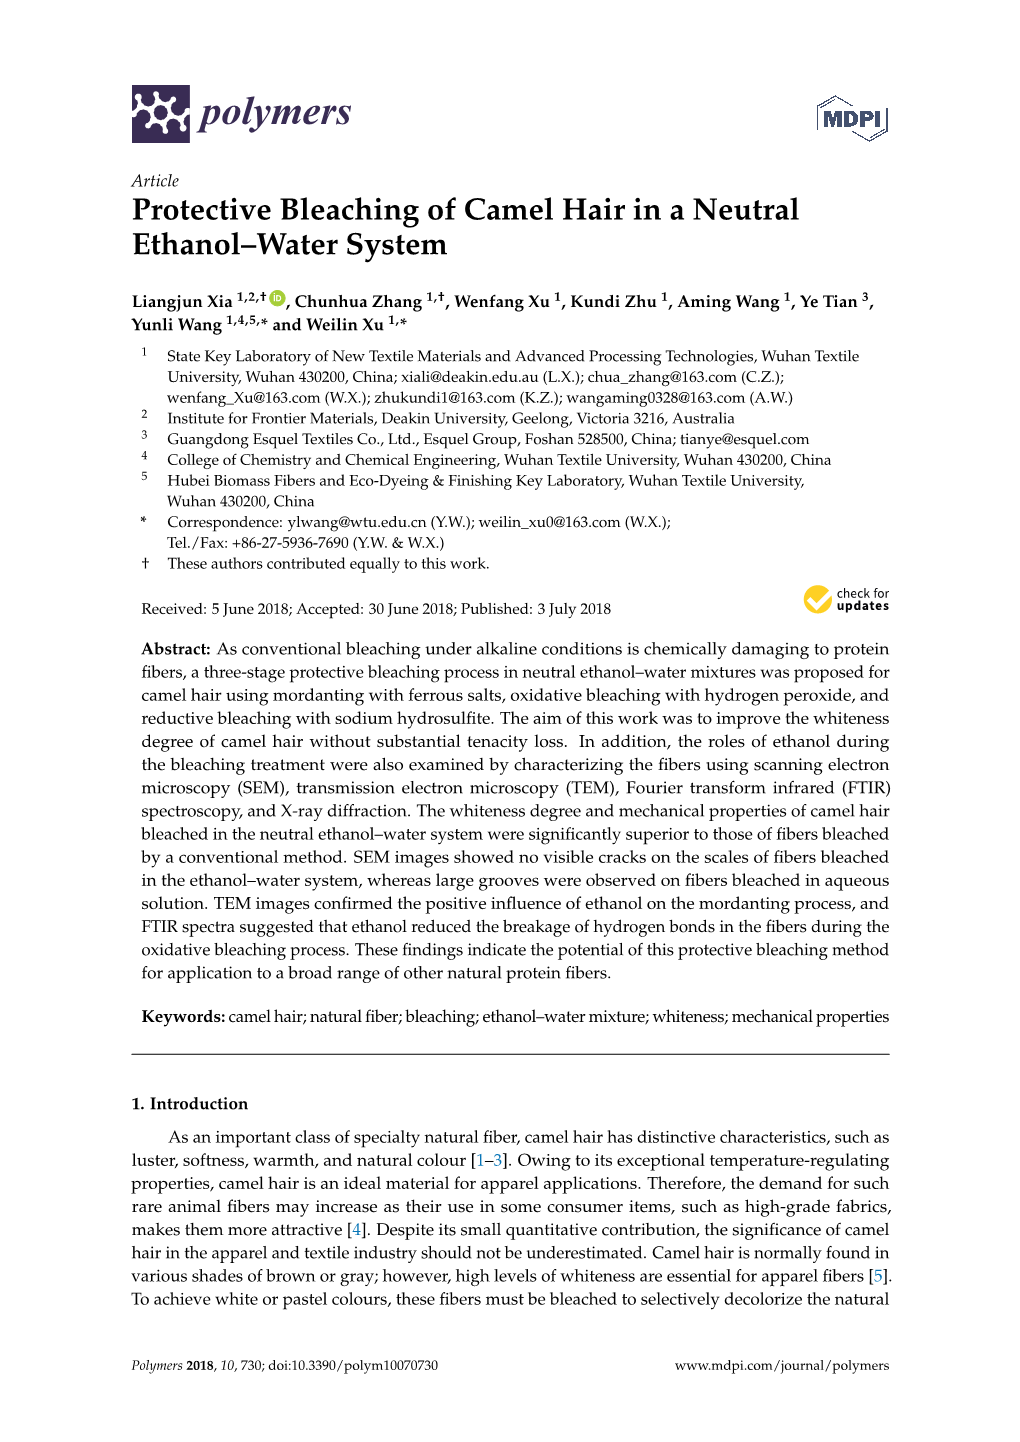 Protective Bleaching of Camel Hair in a Neutral Ethanol–Water System